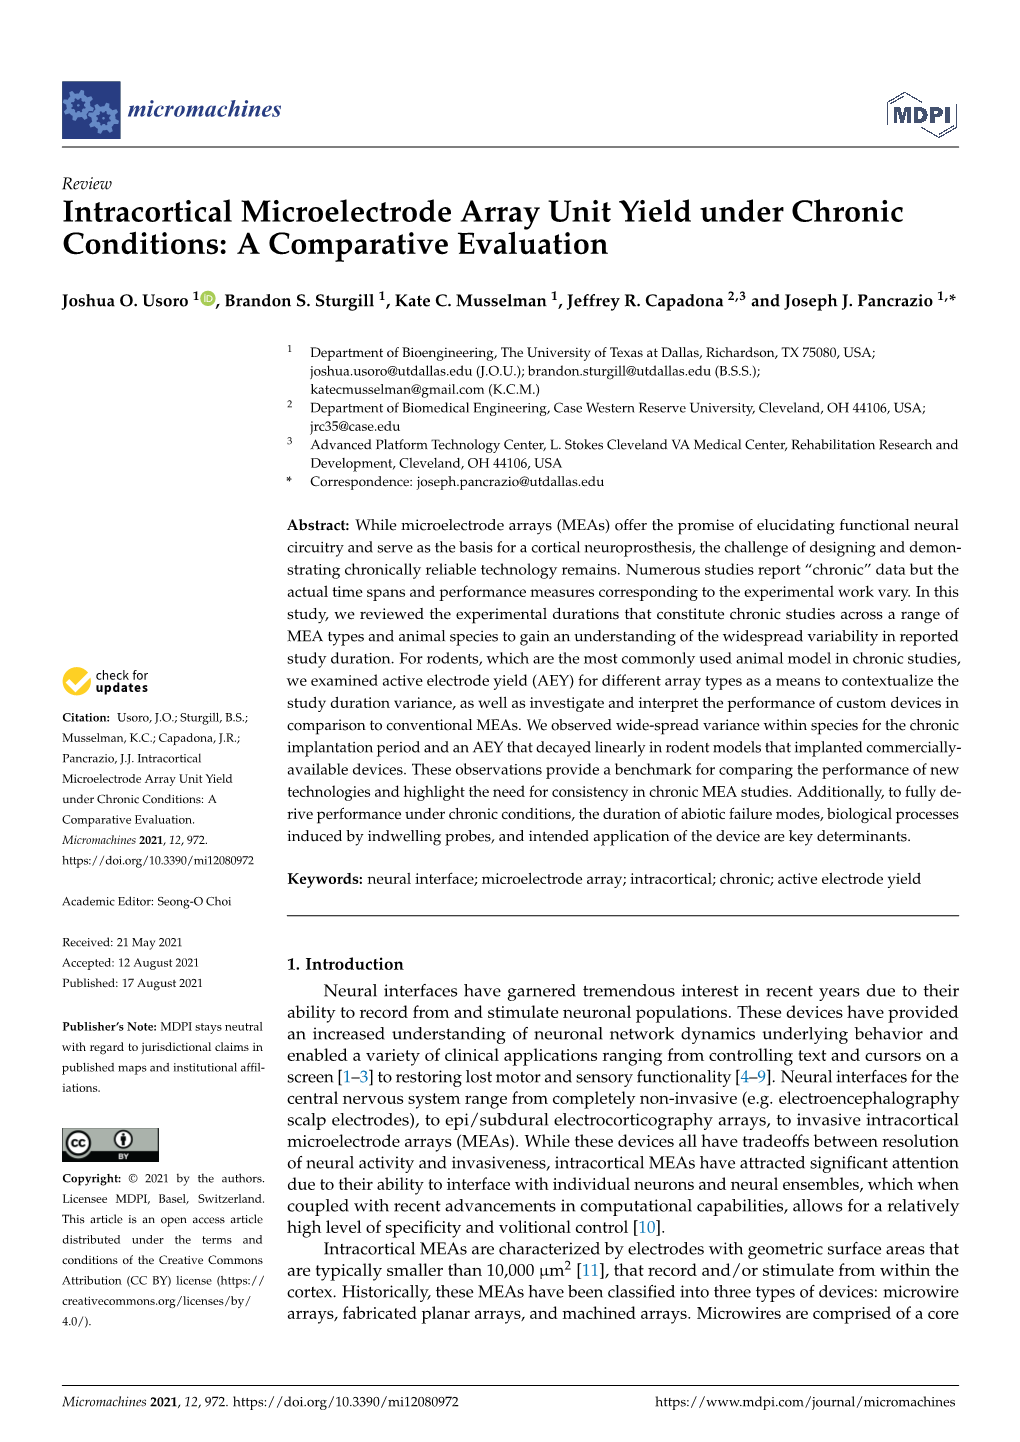 Intracortical Microelectrode Array Unit Yield Under Chronic Conditions: a Comparative Evaluation